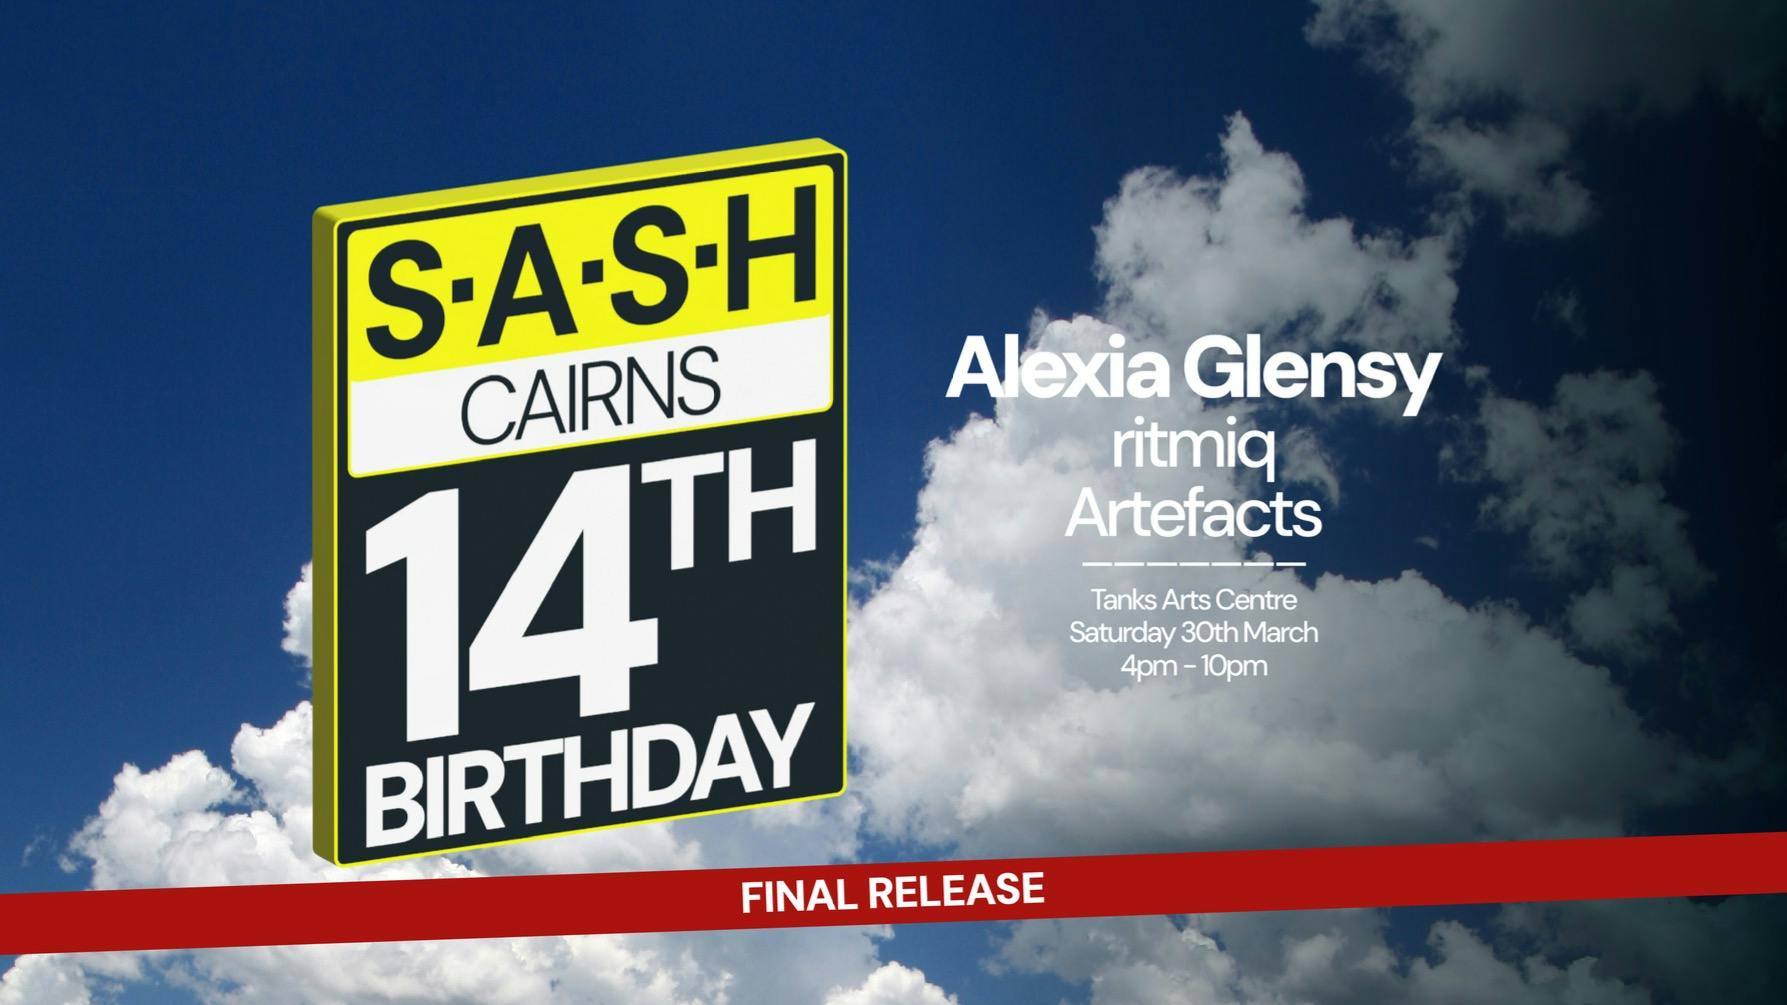 ★ S.A.S.H Cairns 14th Birthday ★ Alexia Glensy ★ Saturday 30th March ★